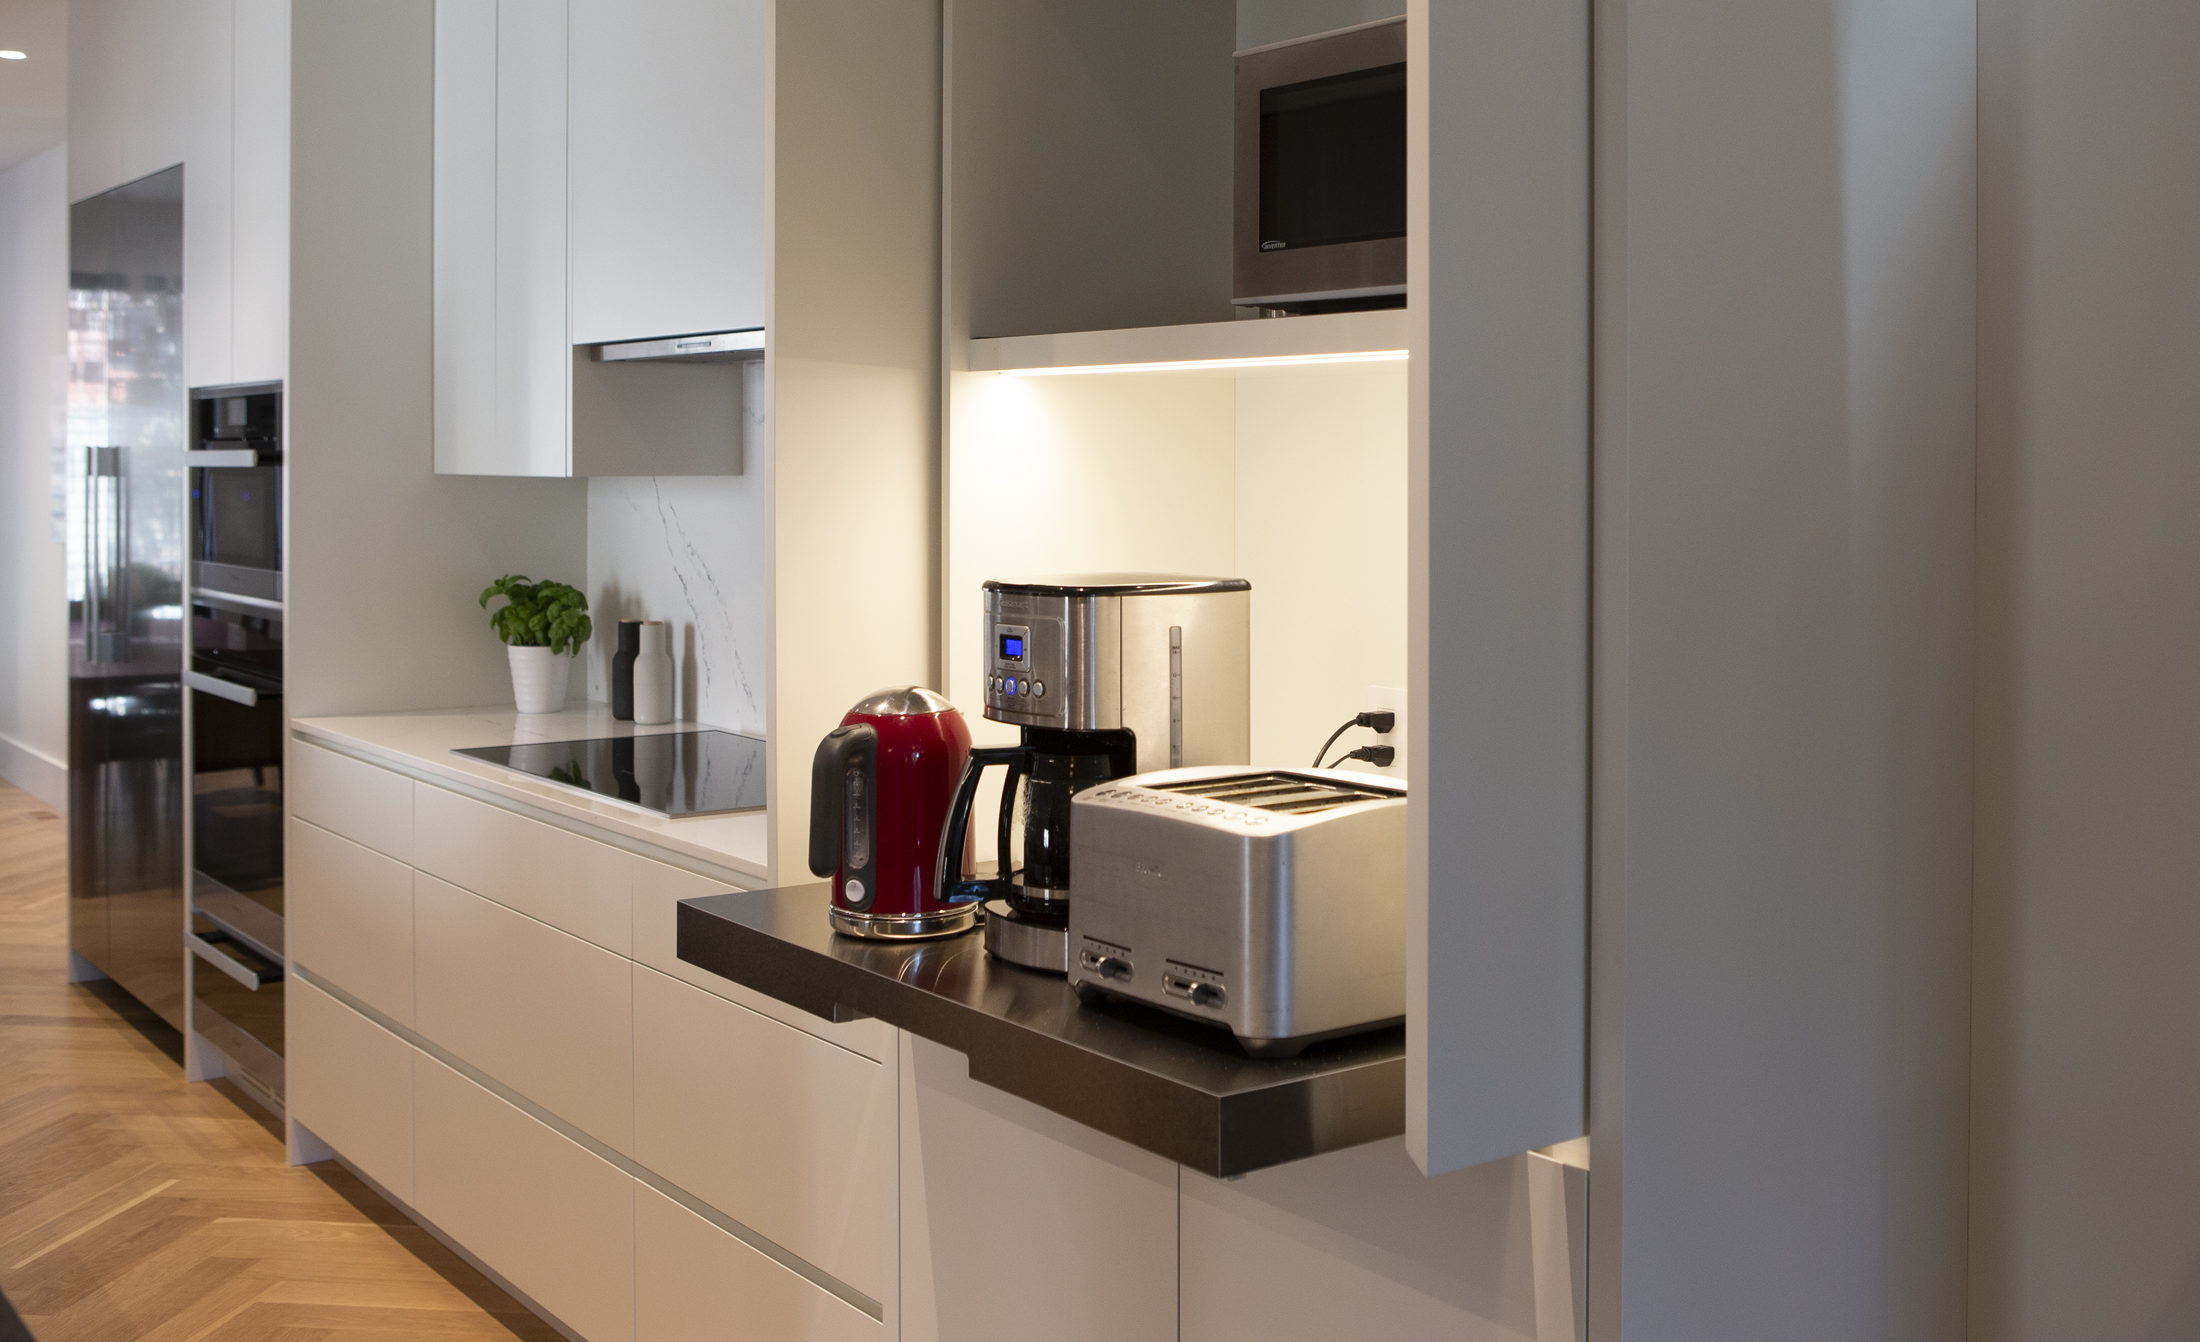 Modern kitchen with pull out cabinets for appliances